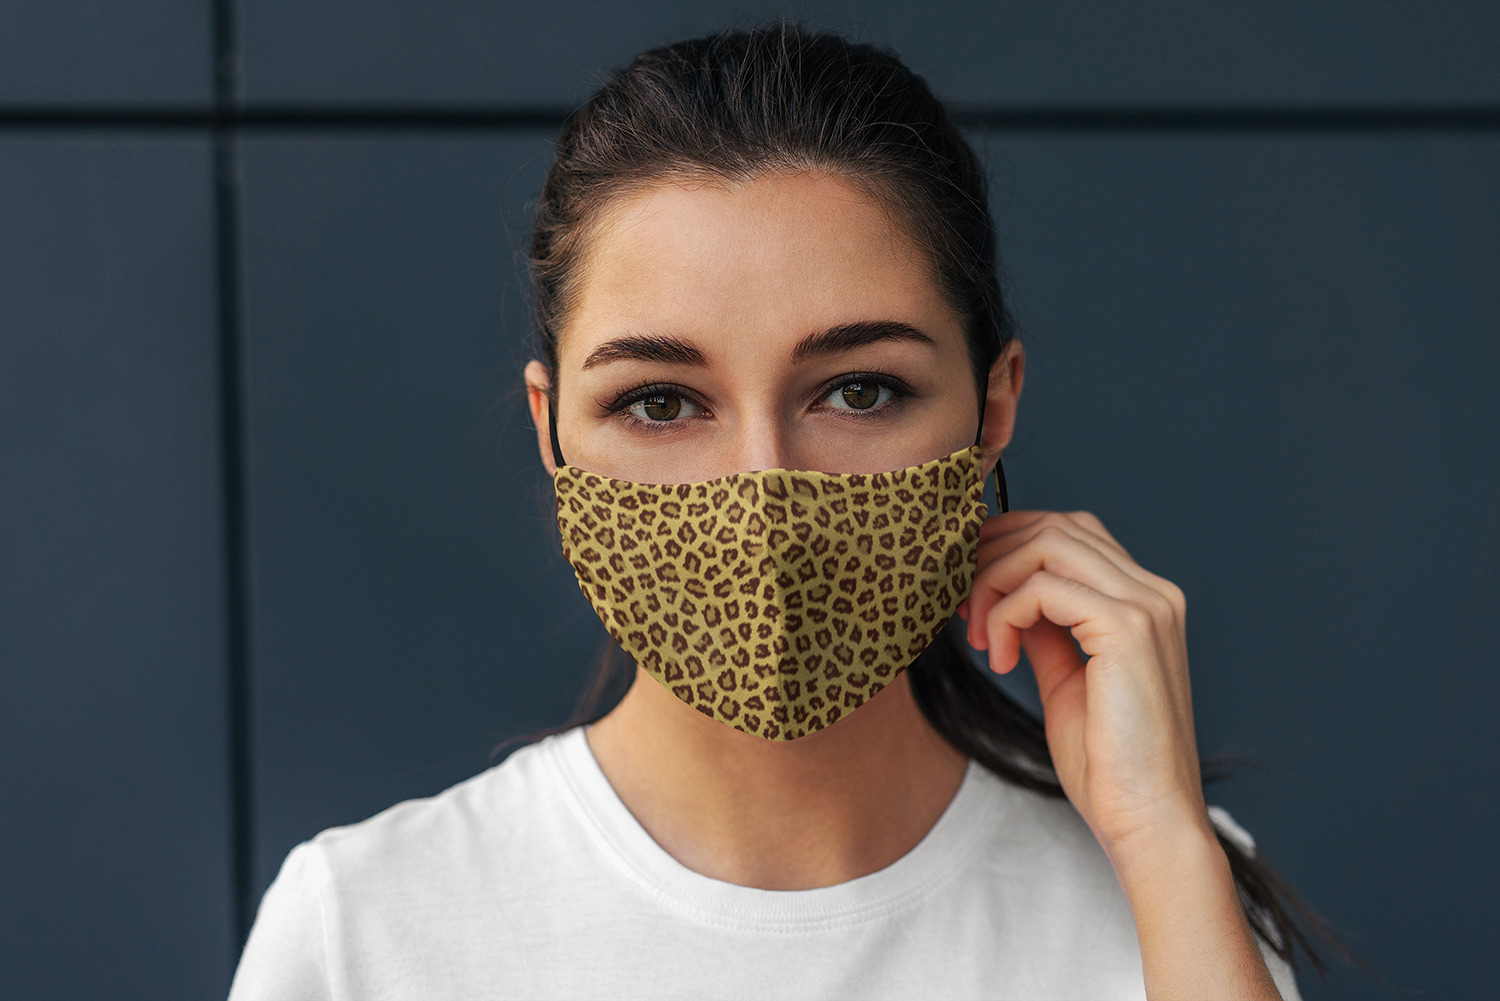 Download Free 2089+ Face Mask Pictures Download Yellowimages Mockups these mockups if you need to present your logo and other branding projects.